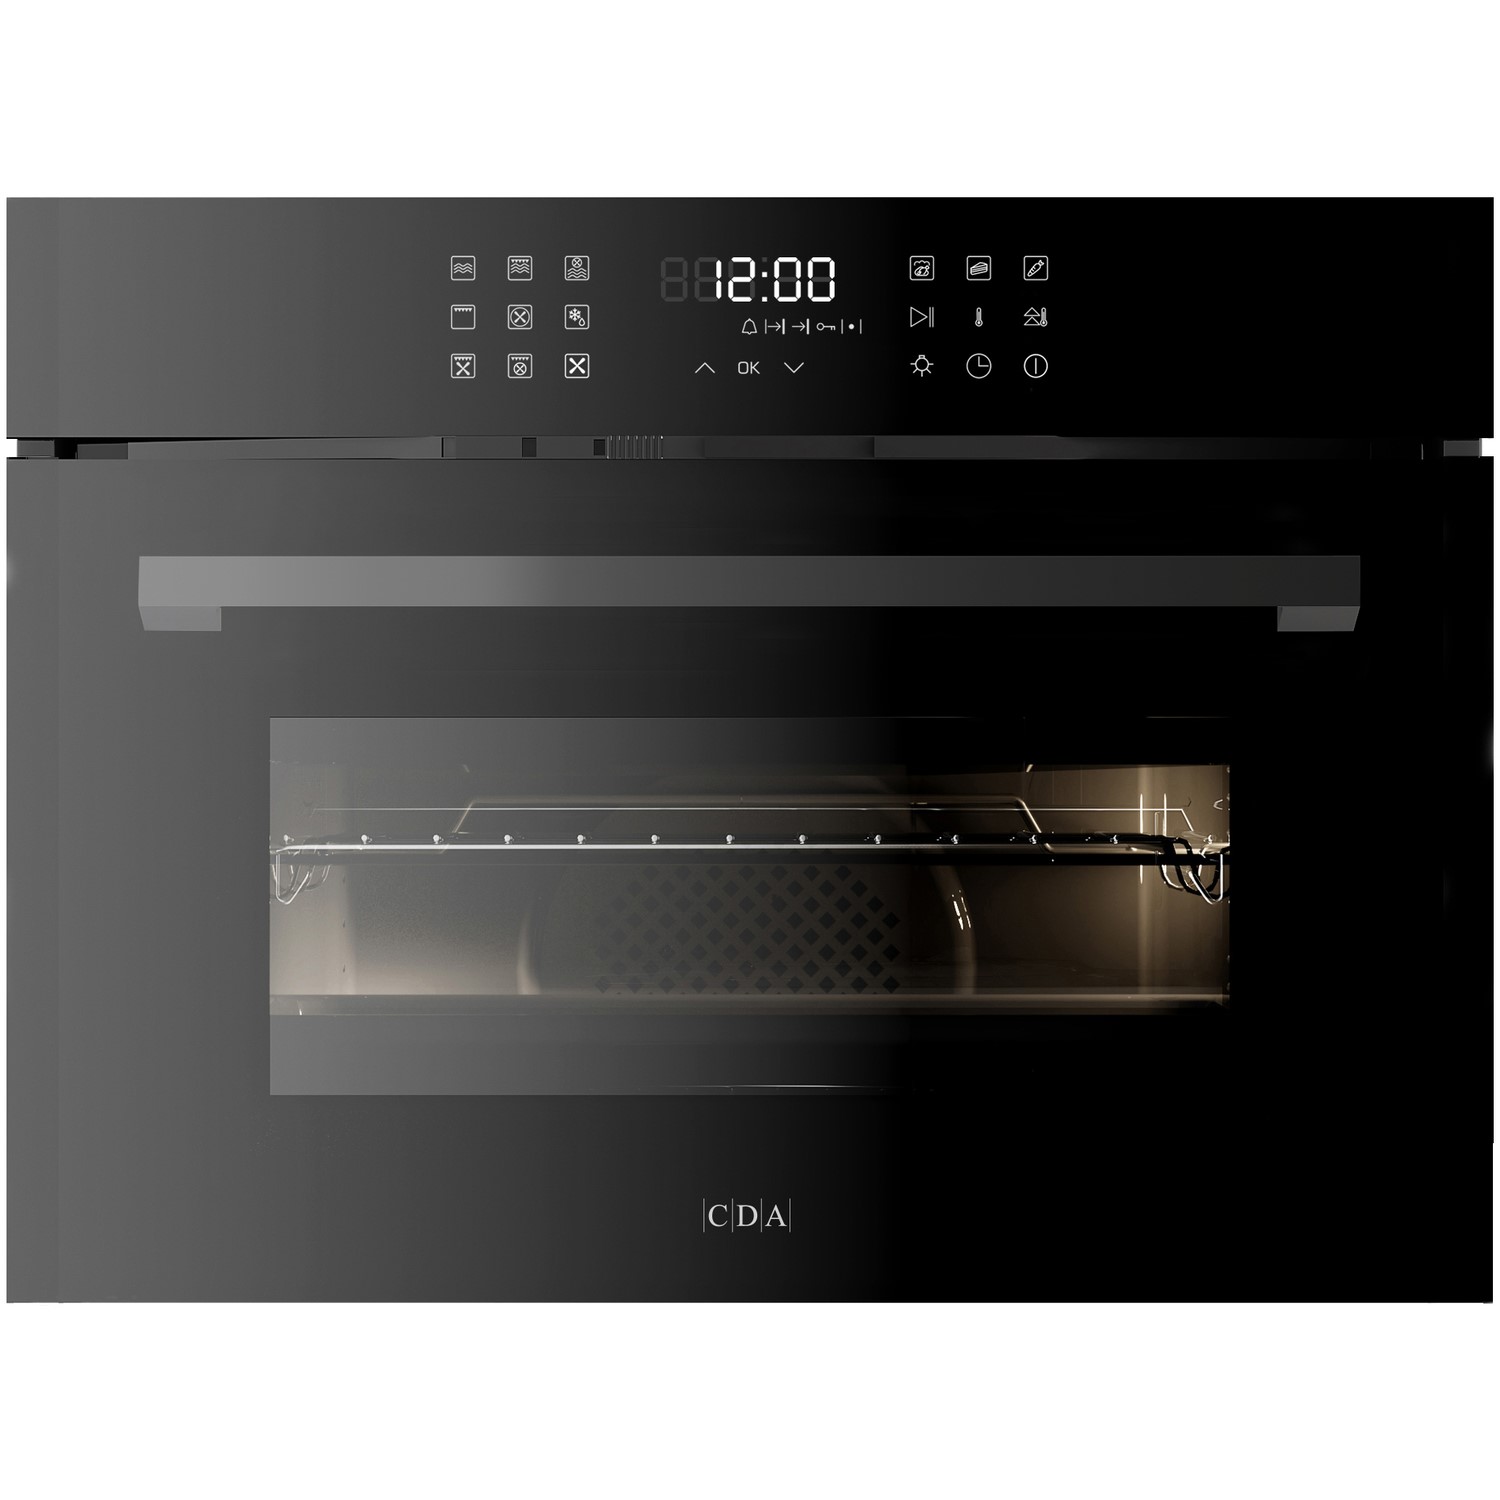 Photos - Other for Computer CDA Built-In Combination Microwave Oven - Black VK903BL 